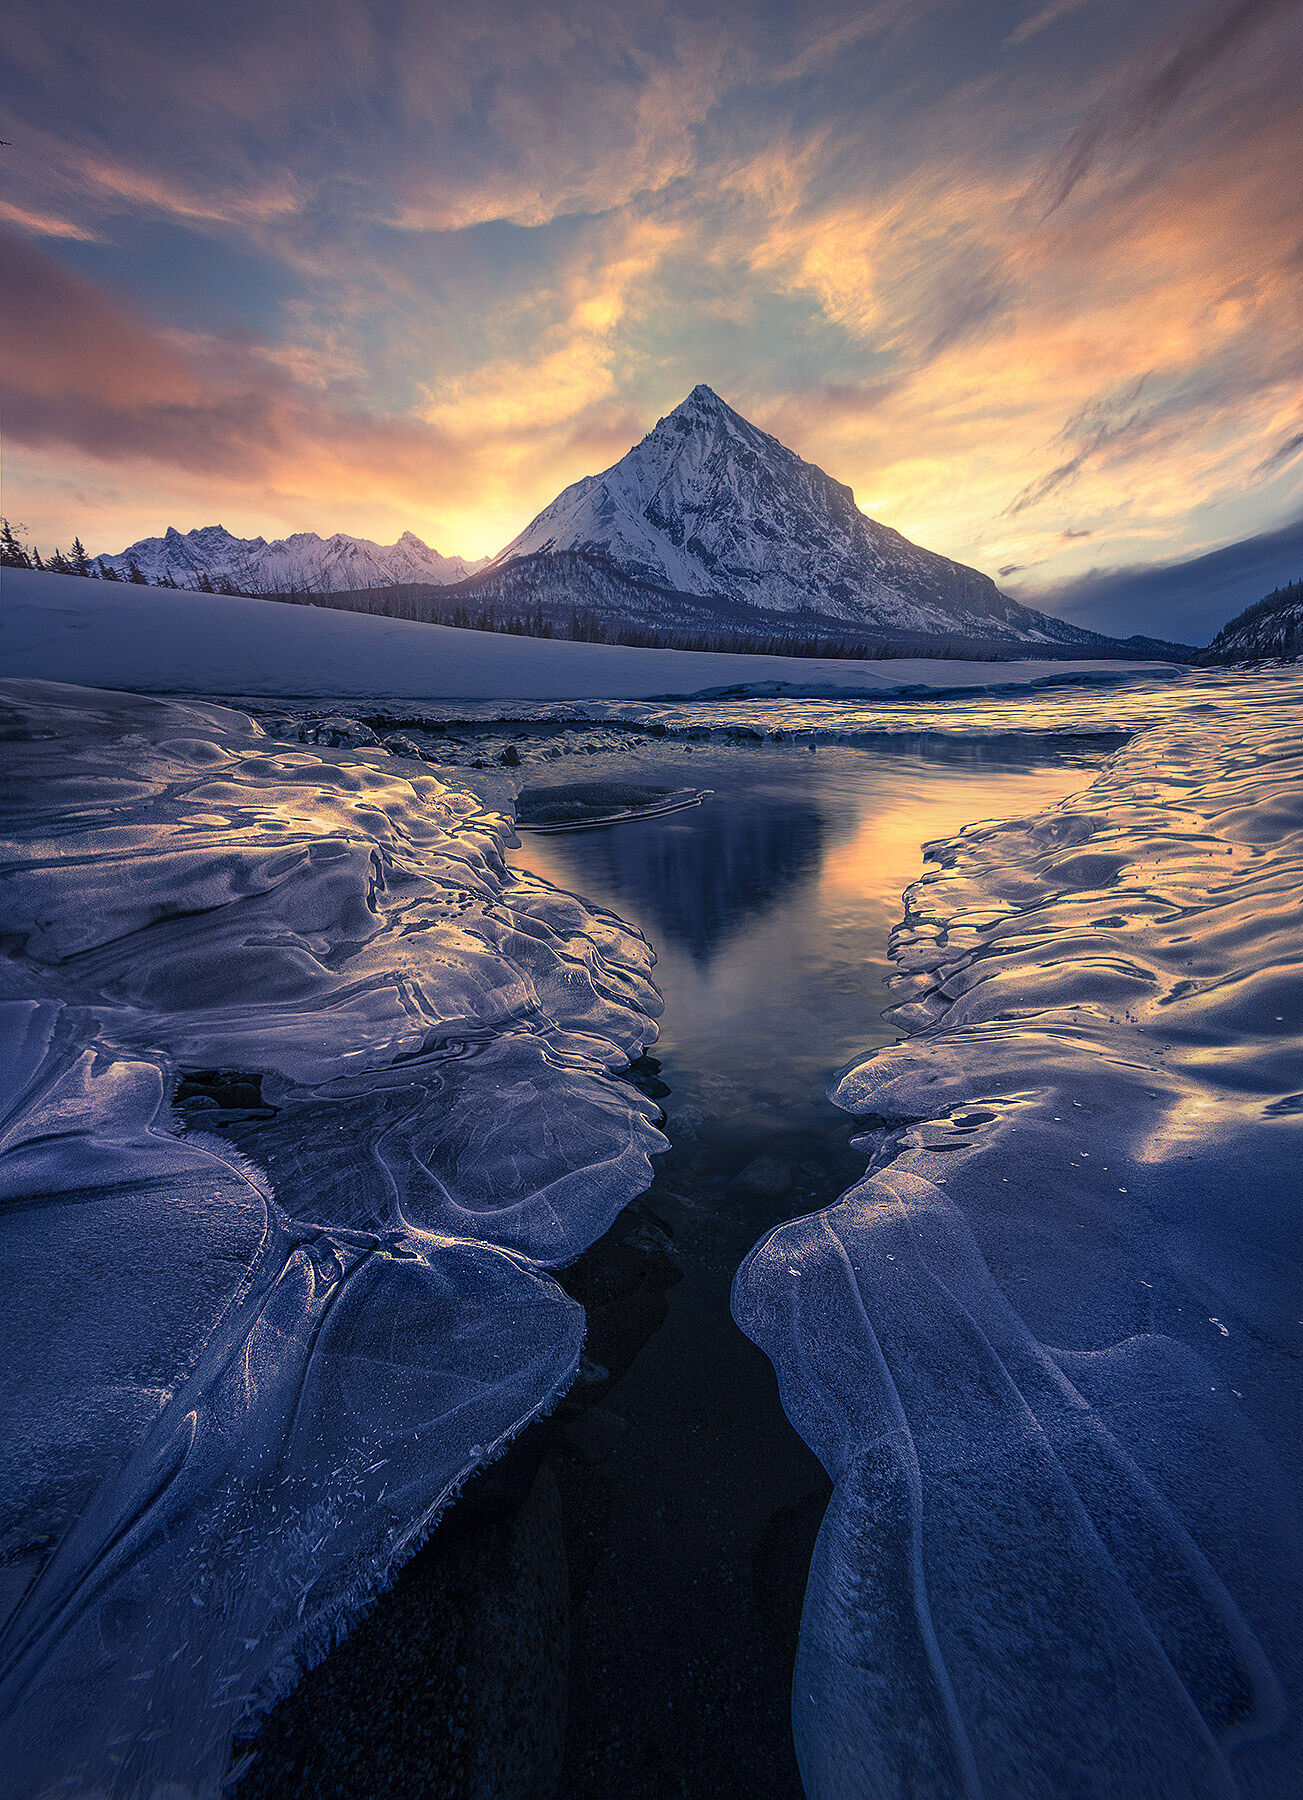 Icy waters reflecting some beautiful light over this sharp Alaskan peak in winter